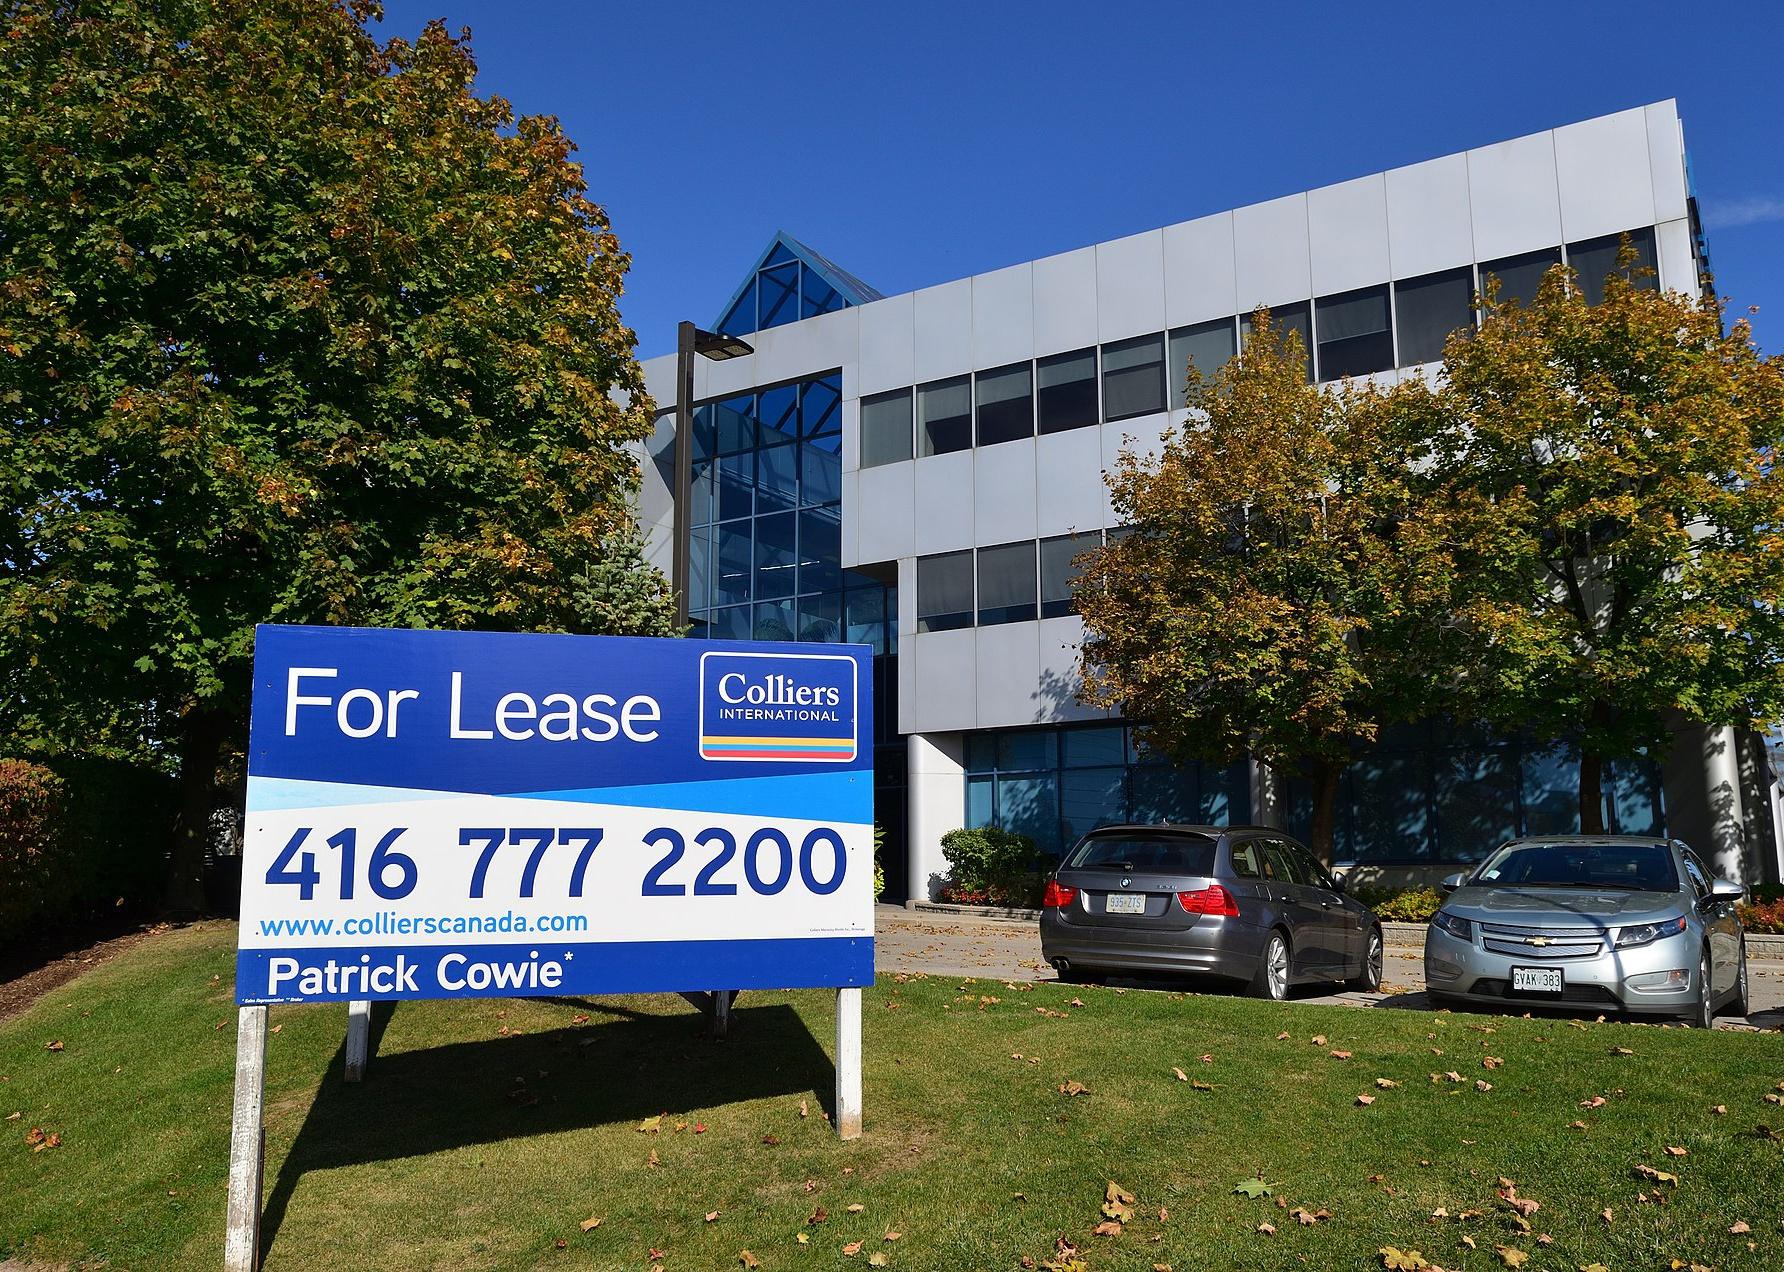 Colliers for lease sign in North America.